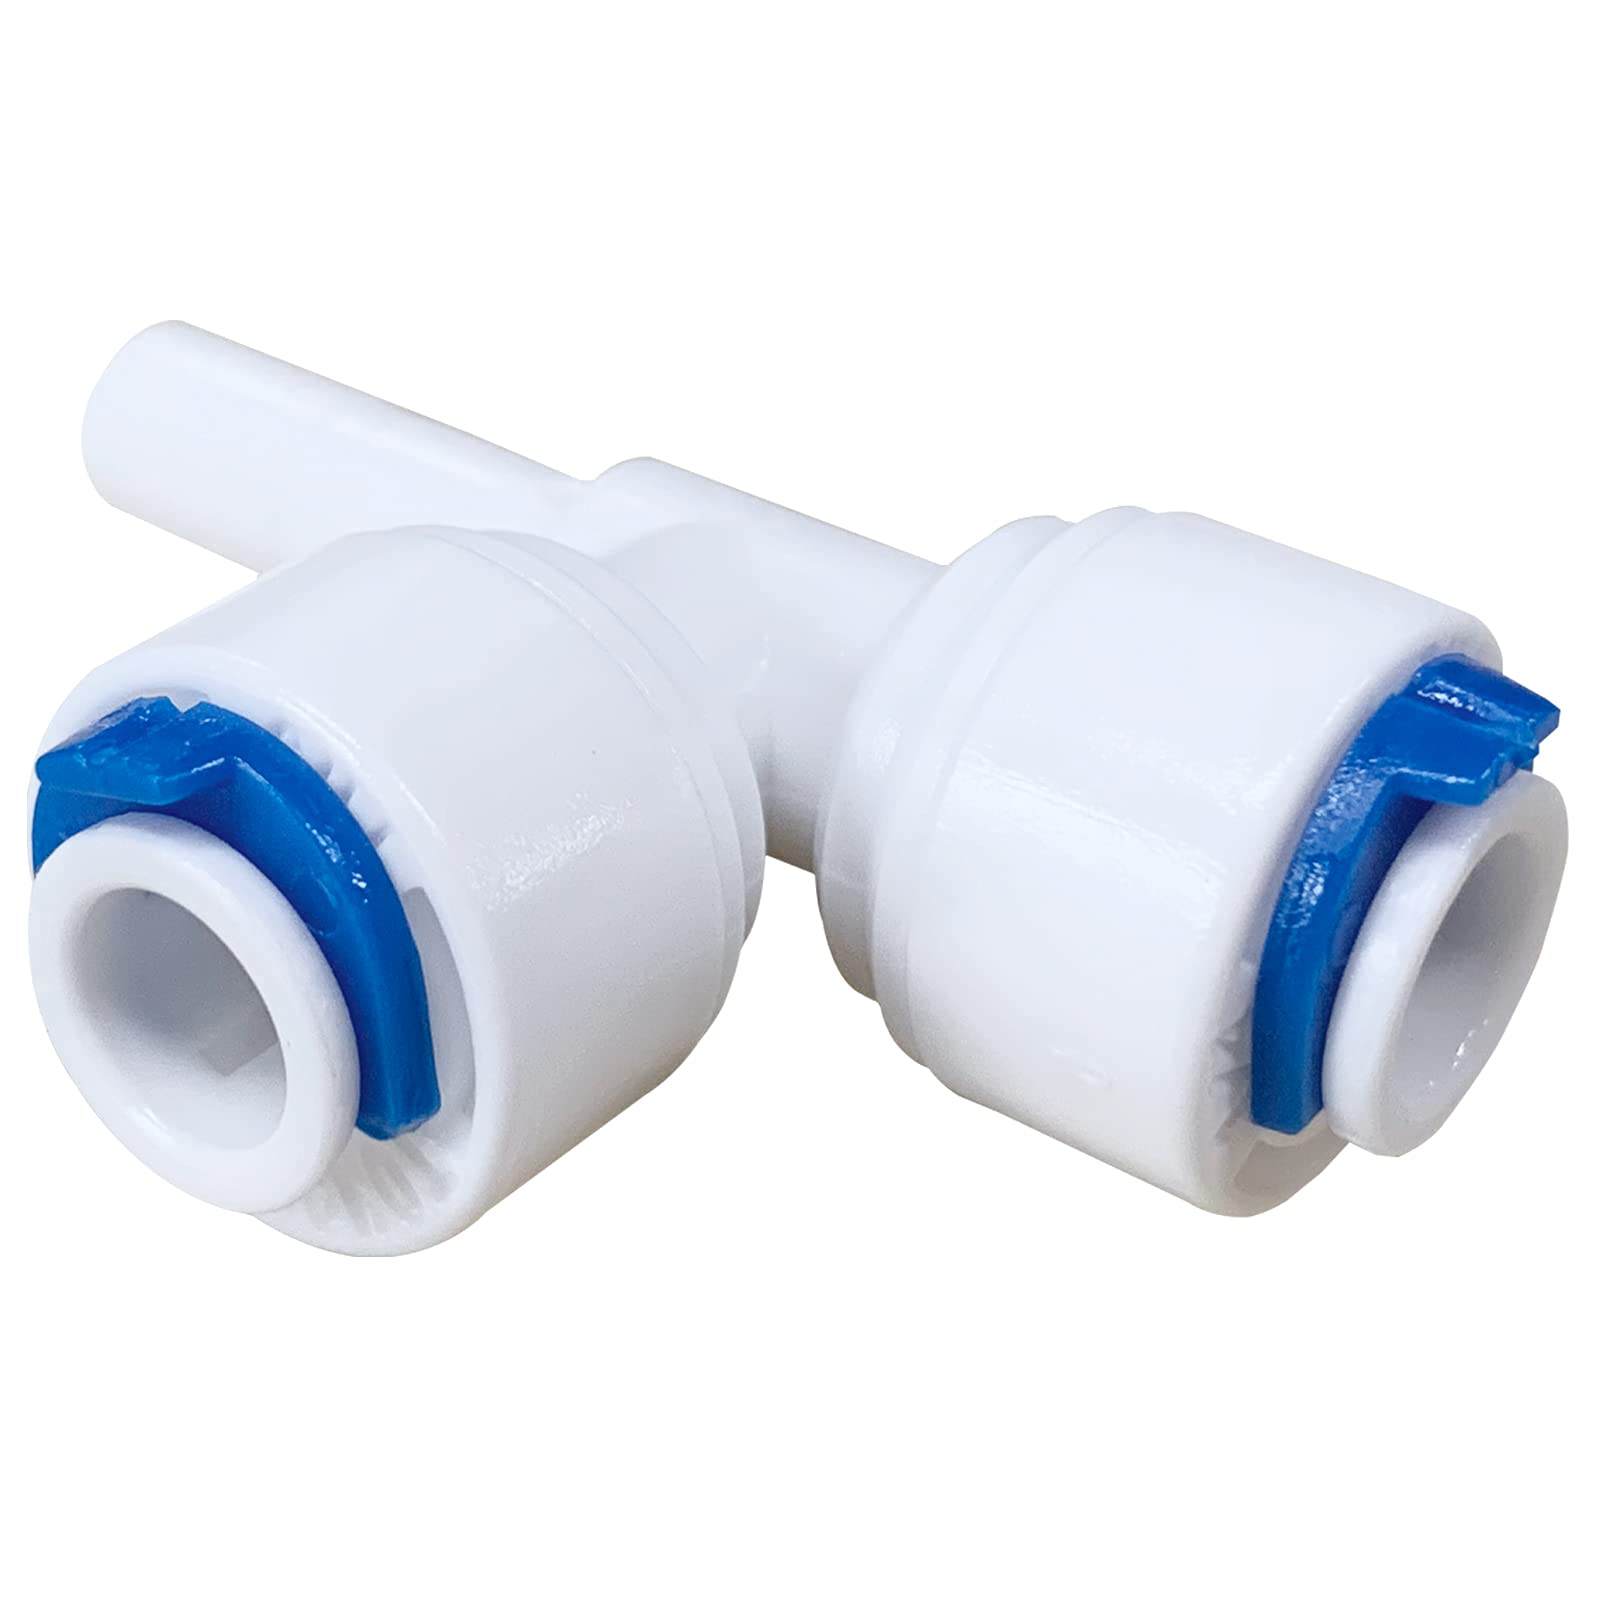 1/4-inch Quick Connect RO Water System Fittings for T33 Inline Water Filter (Pack of 2)